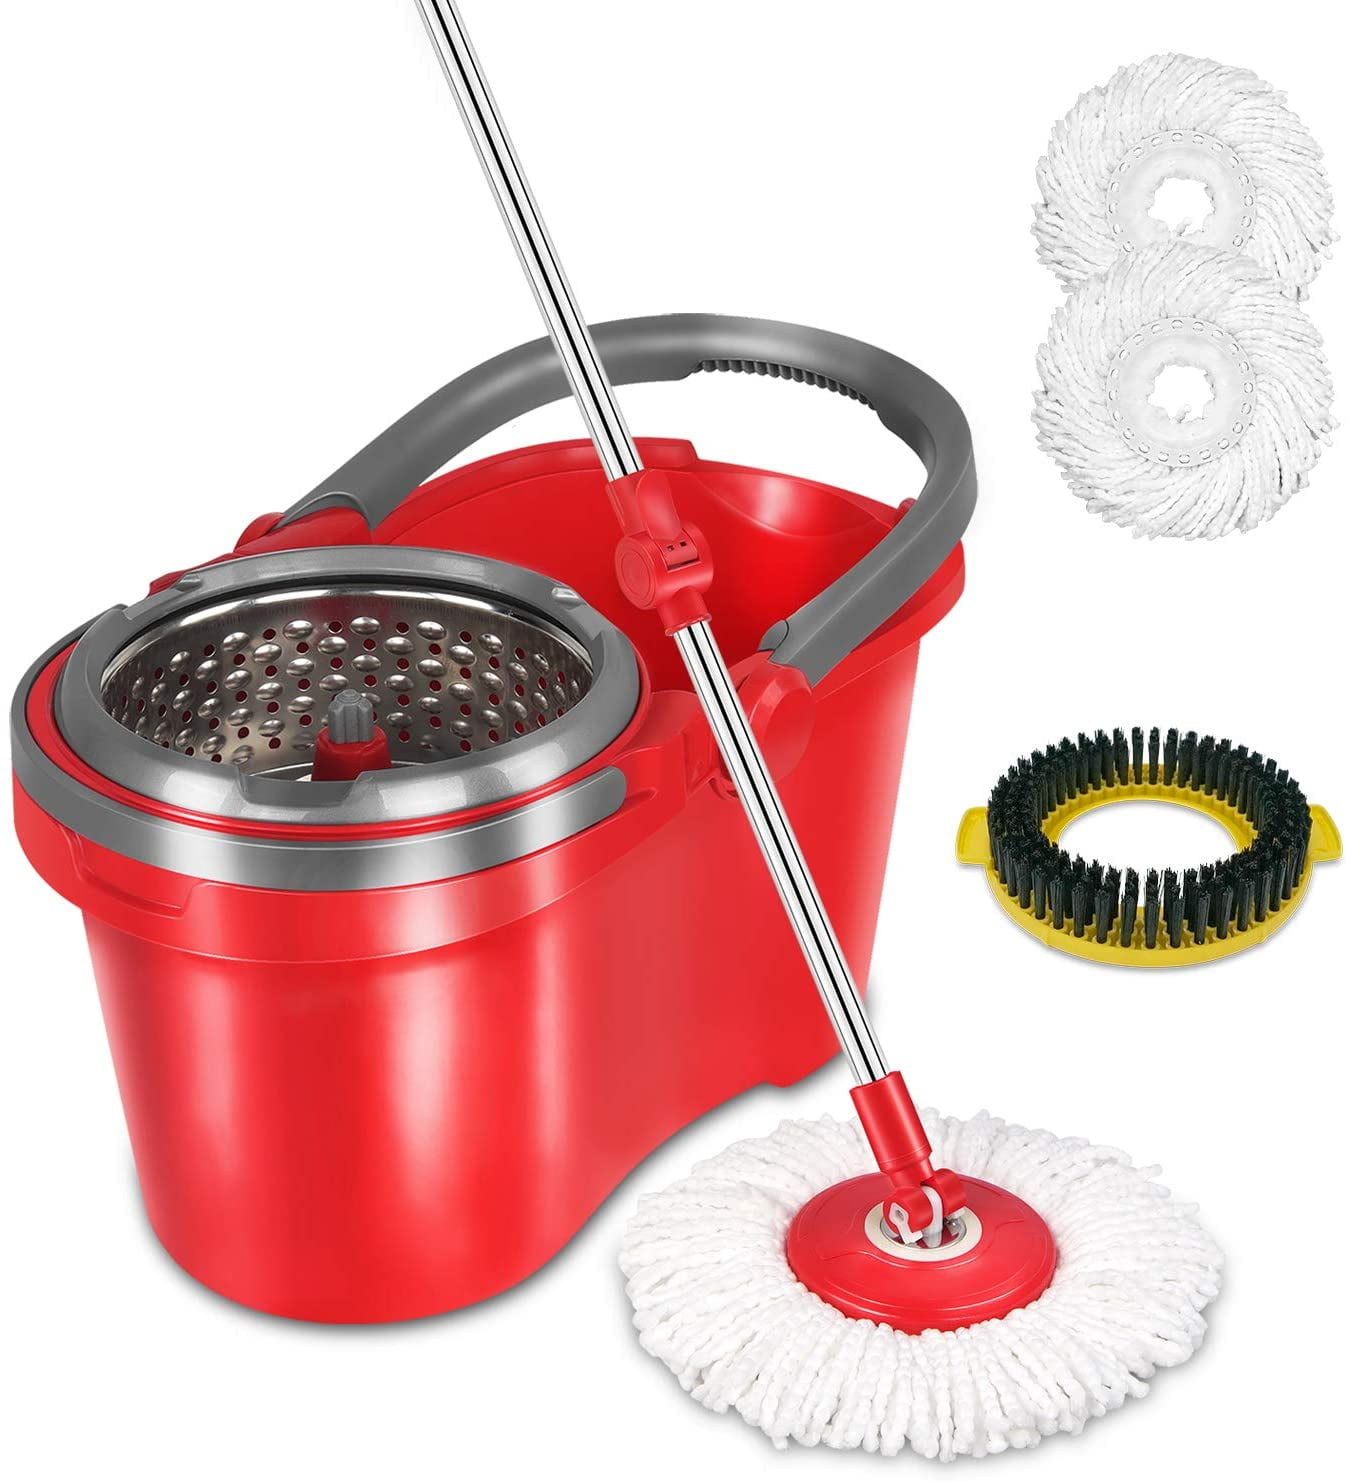 HAPINNEX Spin Mop Wringer Bucket Set for Home Kitchen Floor Cleaning Wet/Dry Usage on